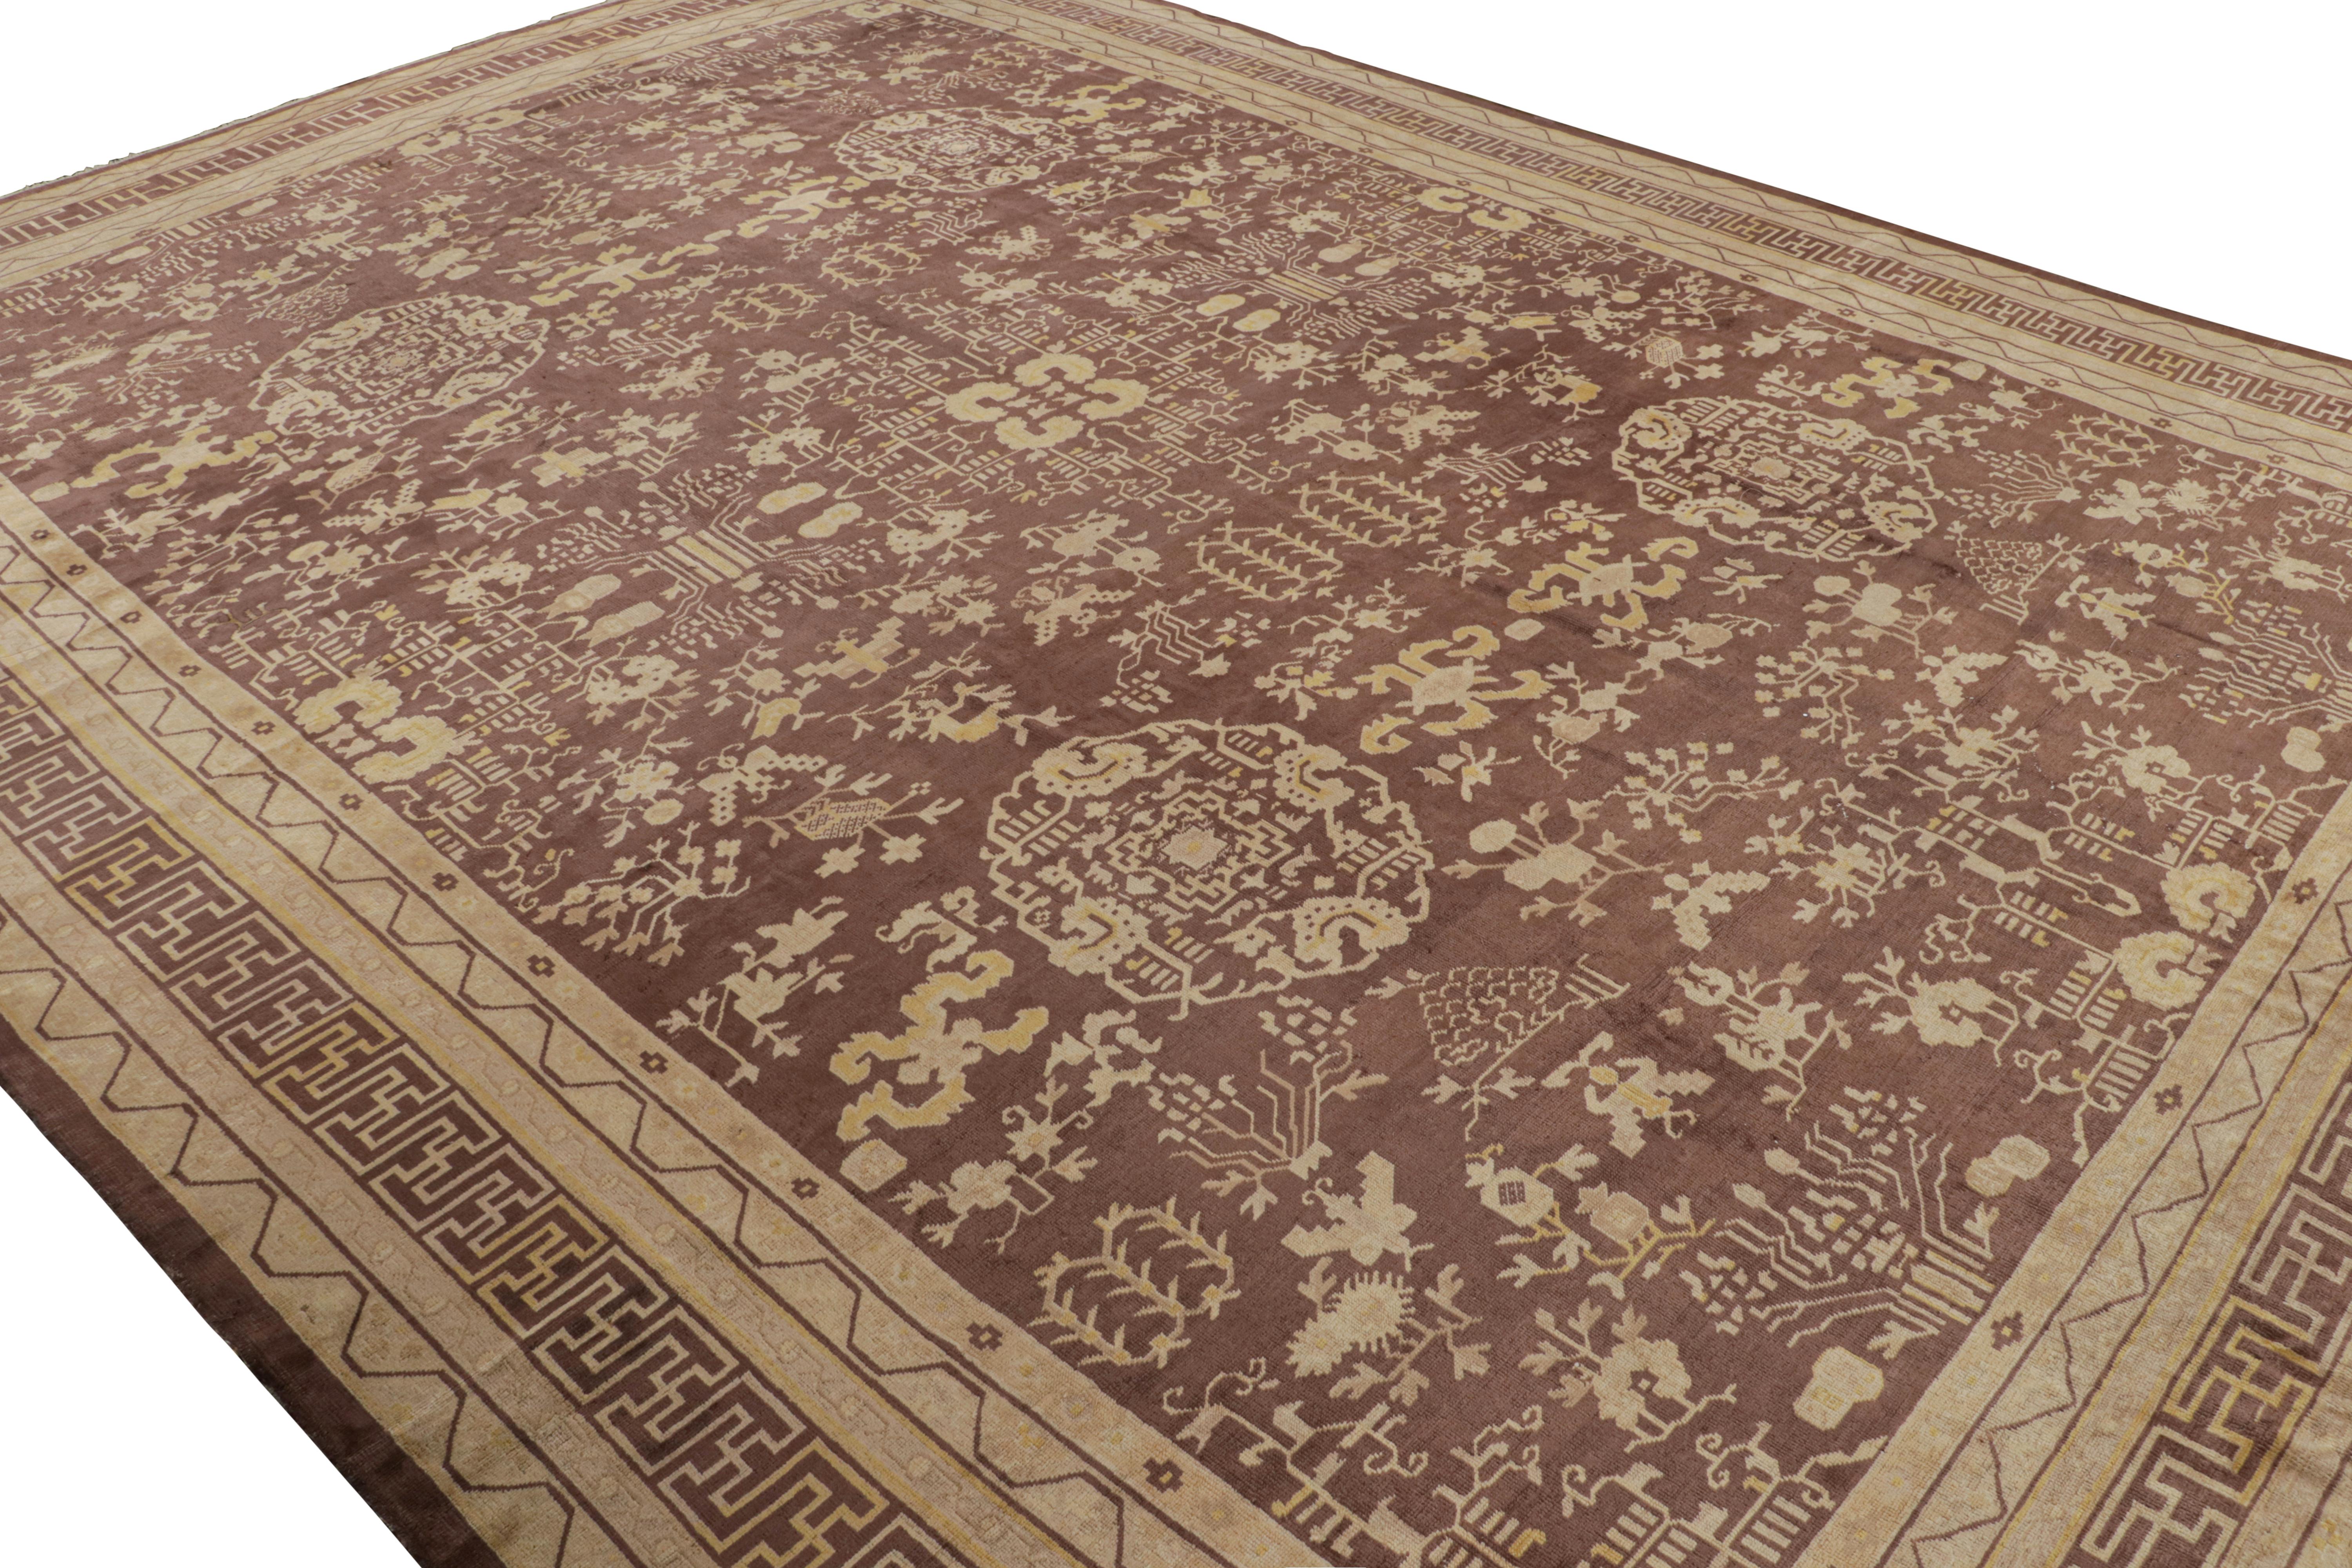 Turkestan Antique Samarkand Rug in Brown with Gold Patterns, from Rug & Kilim For Sale